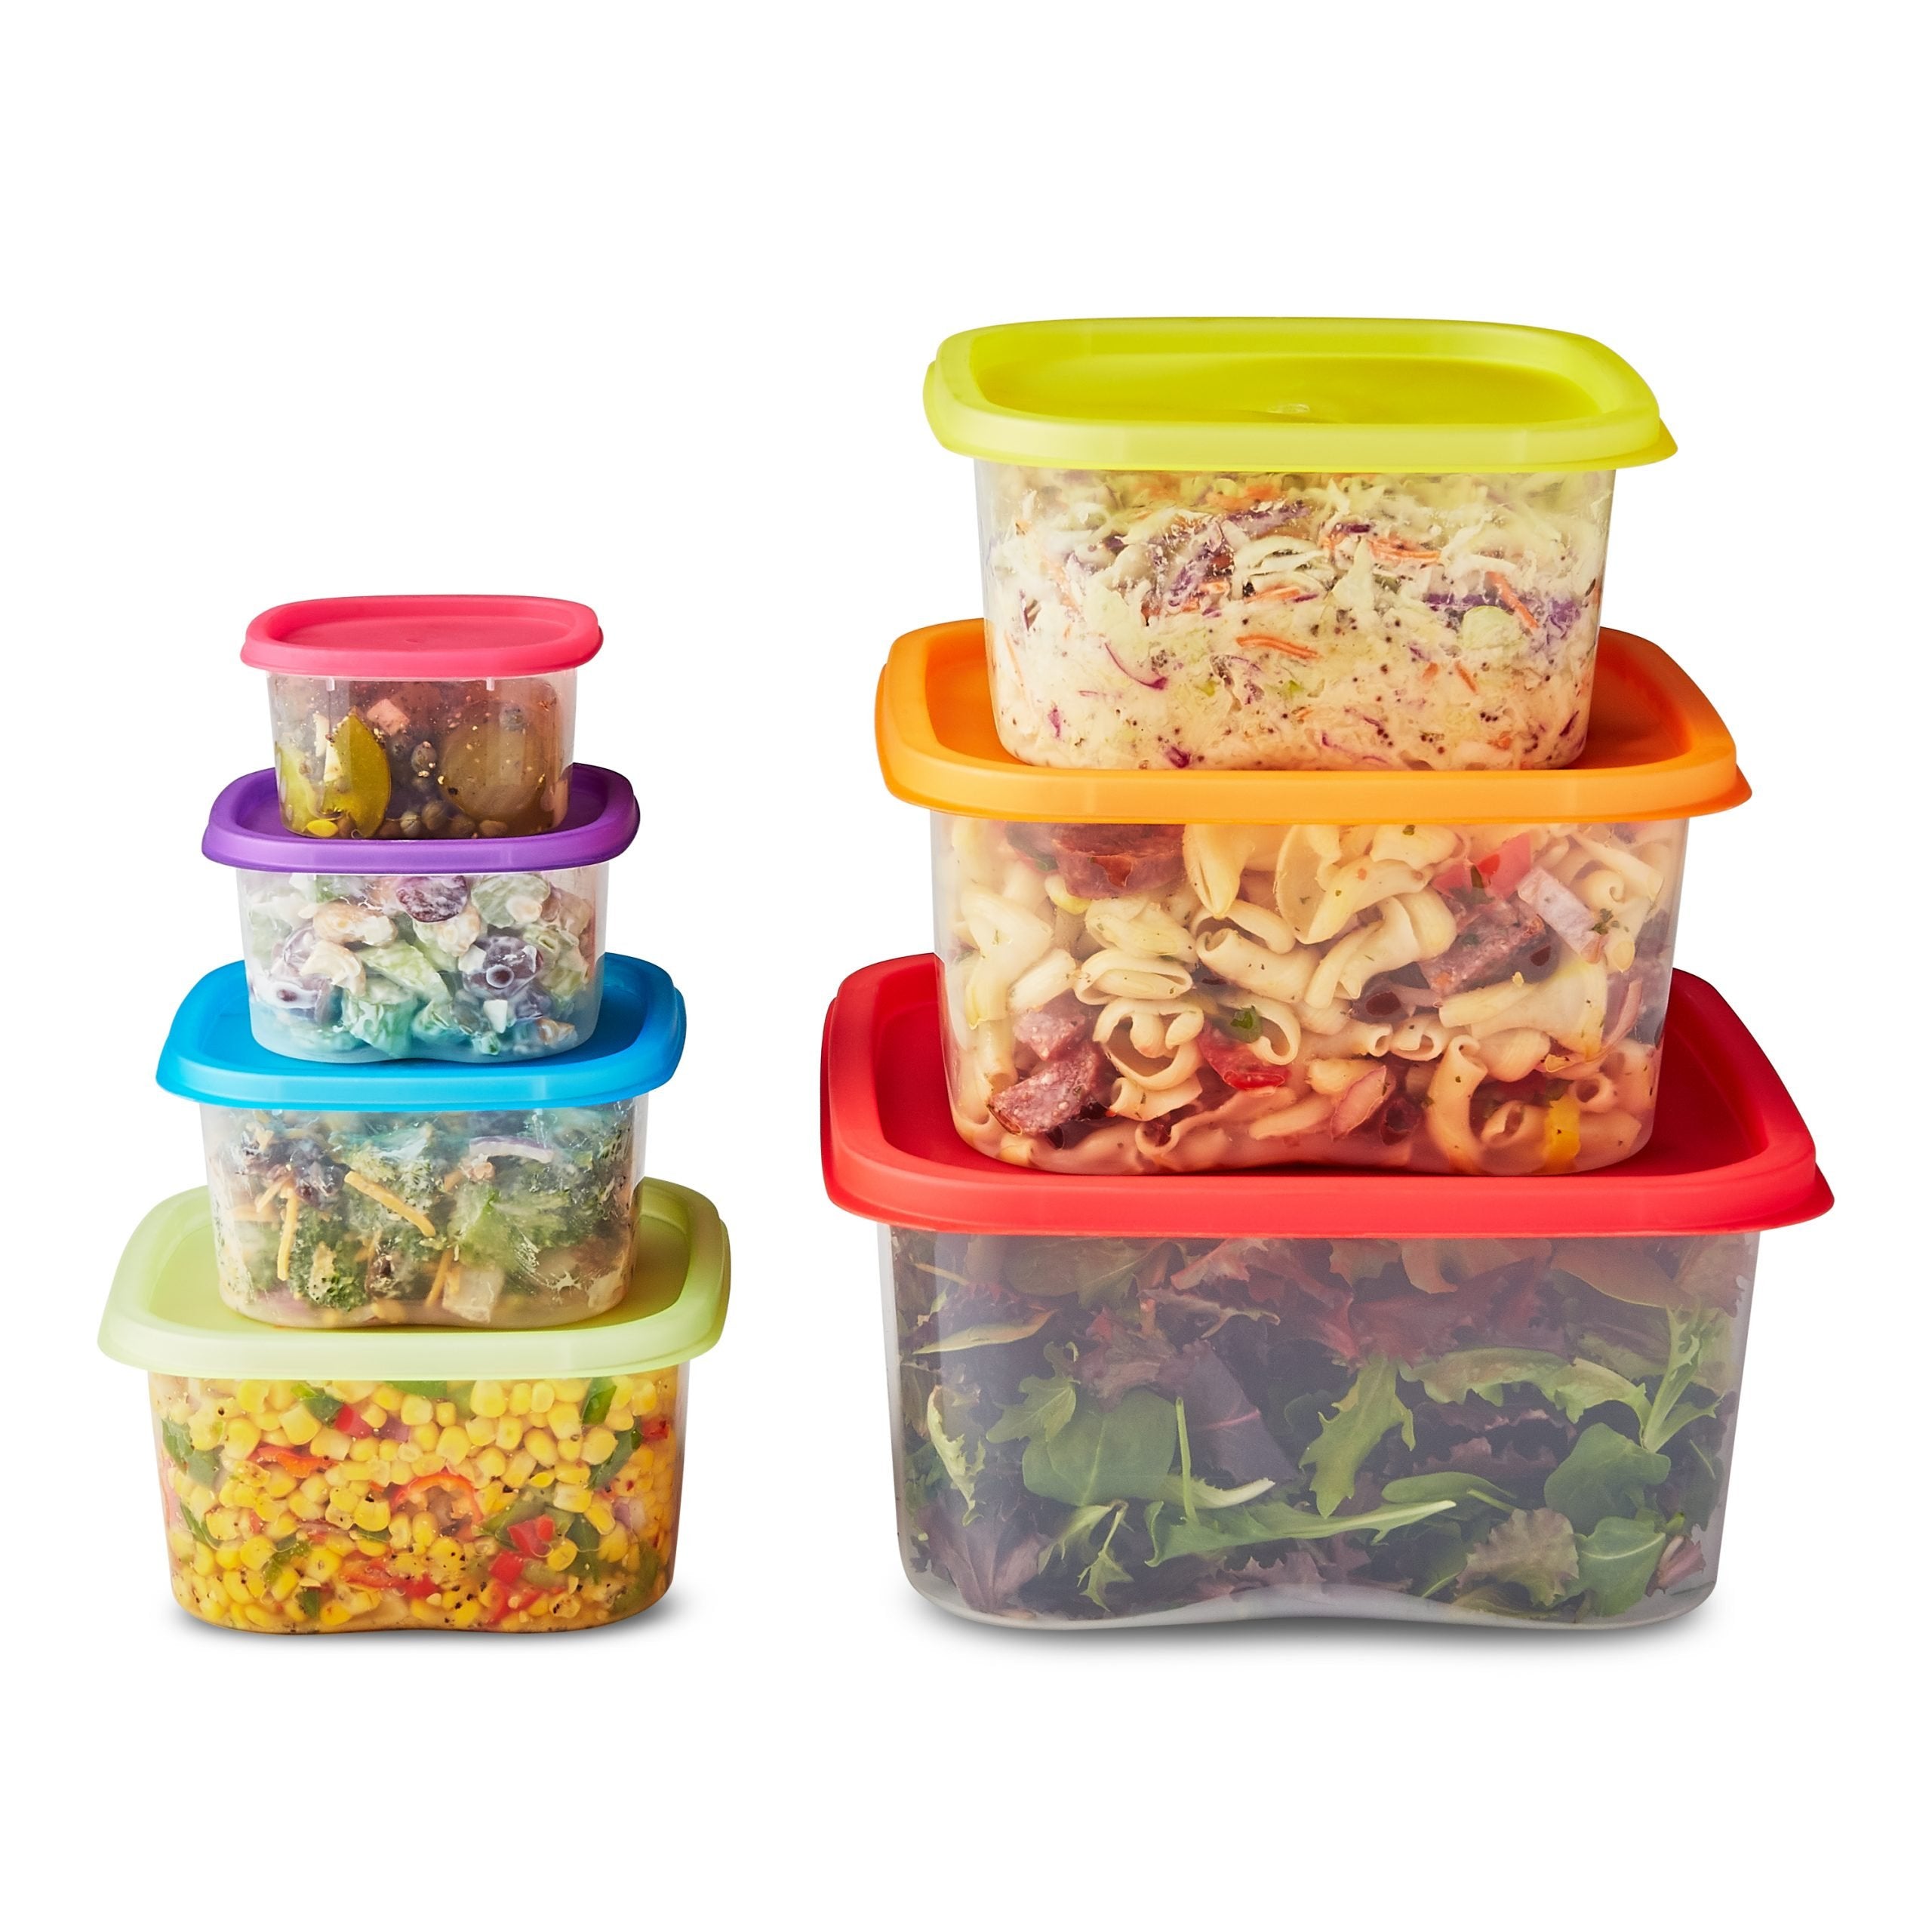 7 Piece Square Food Storage Box / Grocery Containing Set With Multi Color Lids (EBJ)